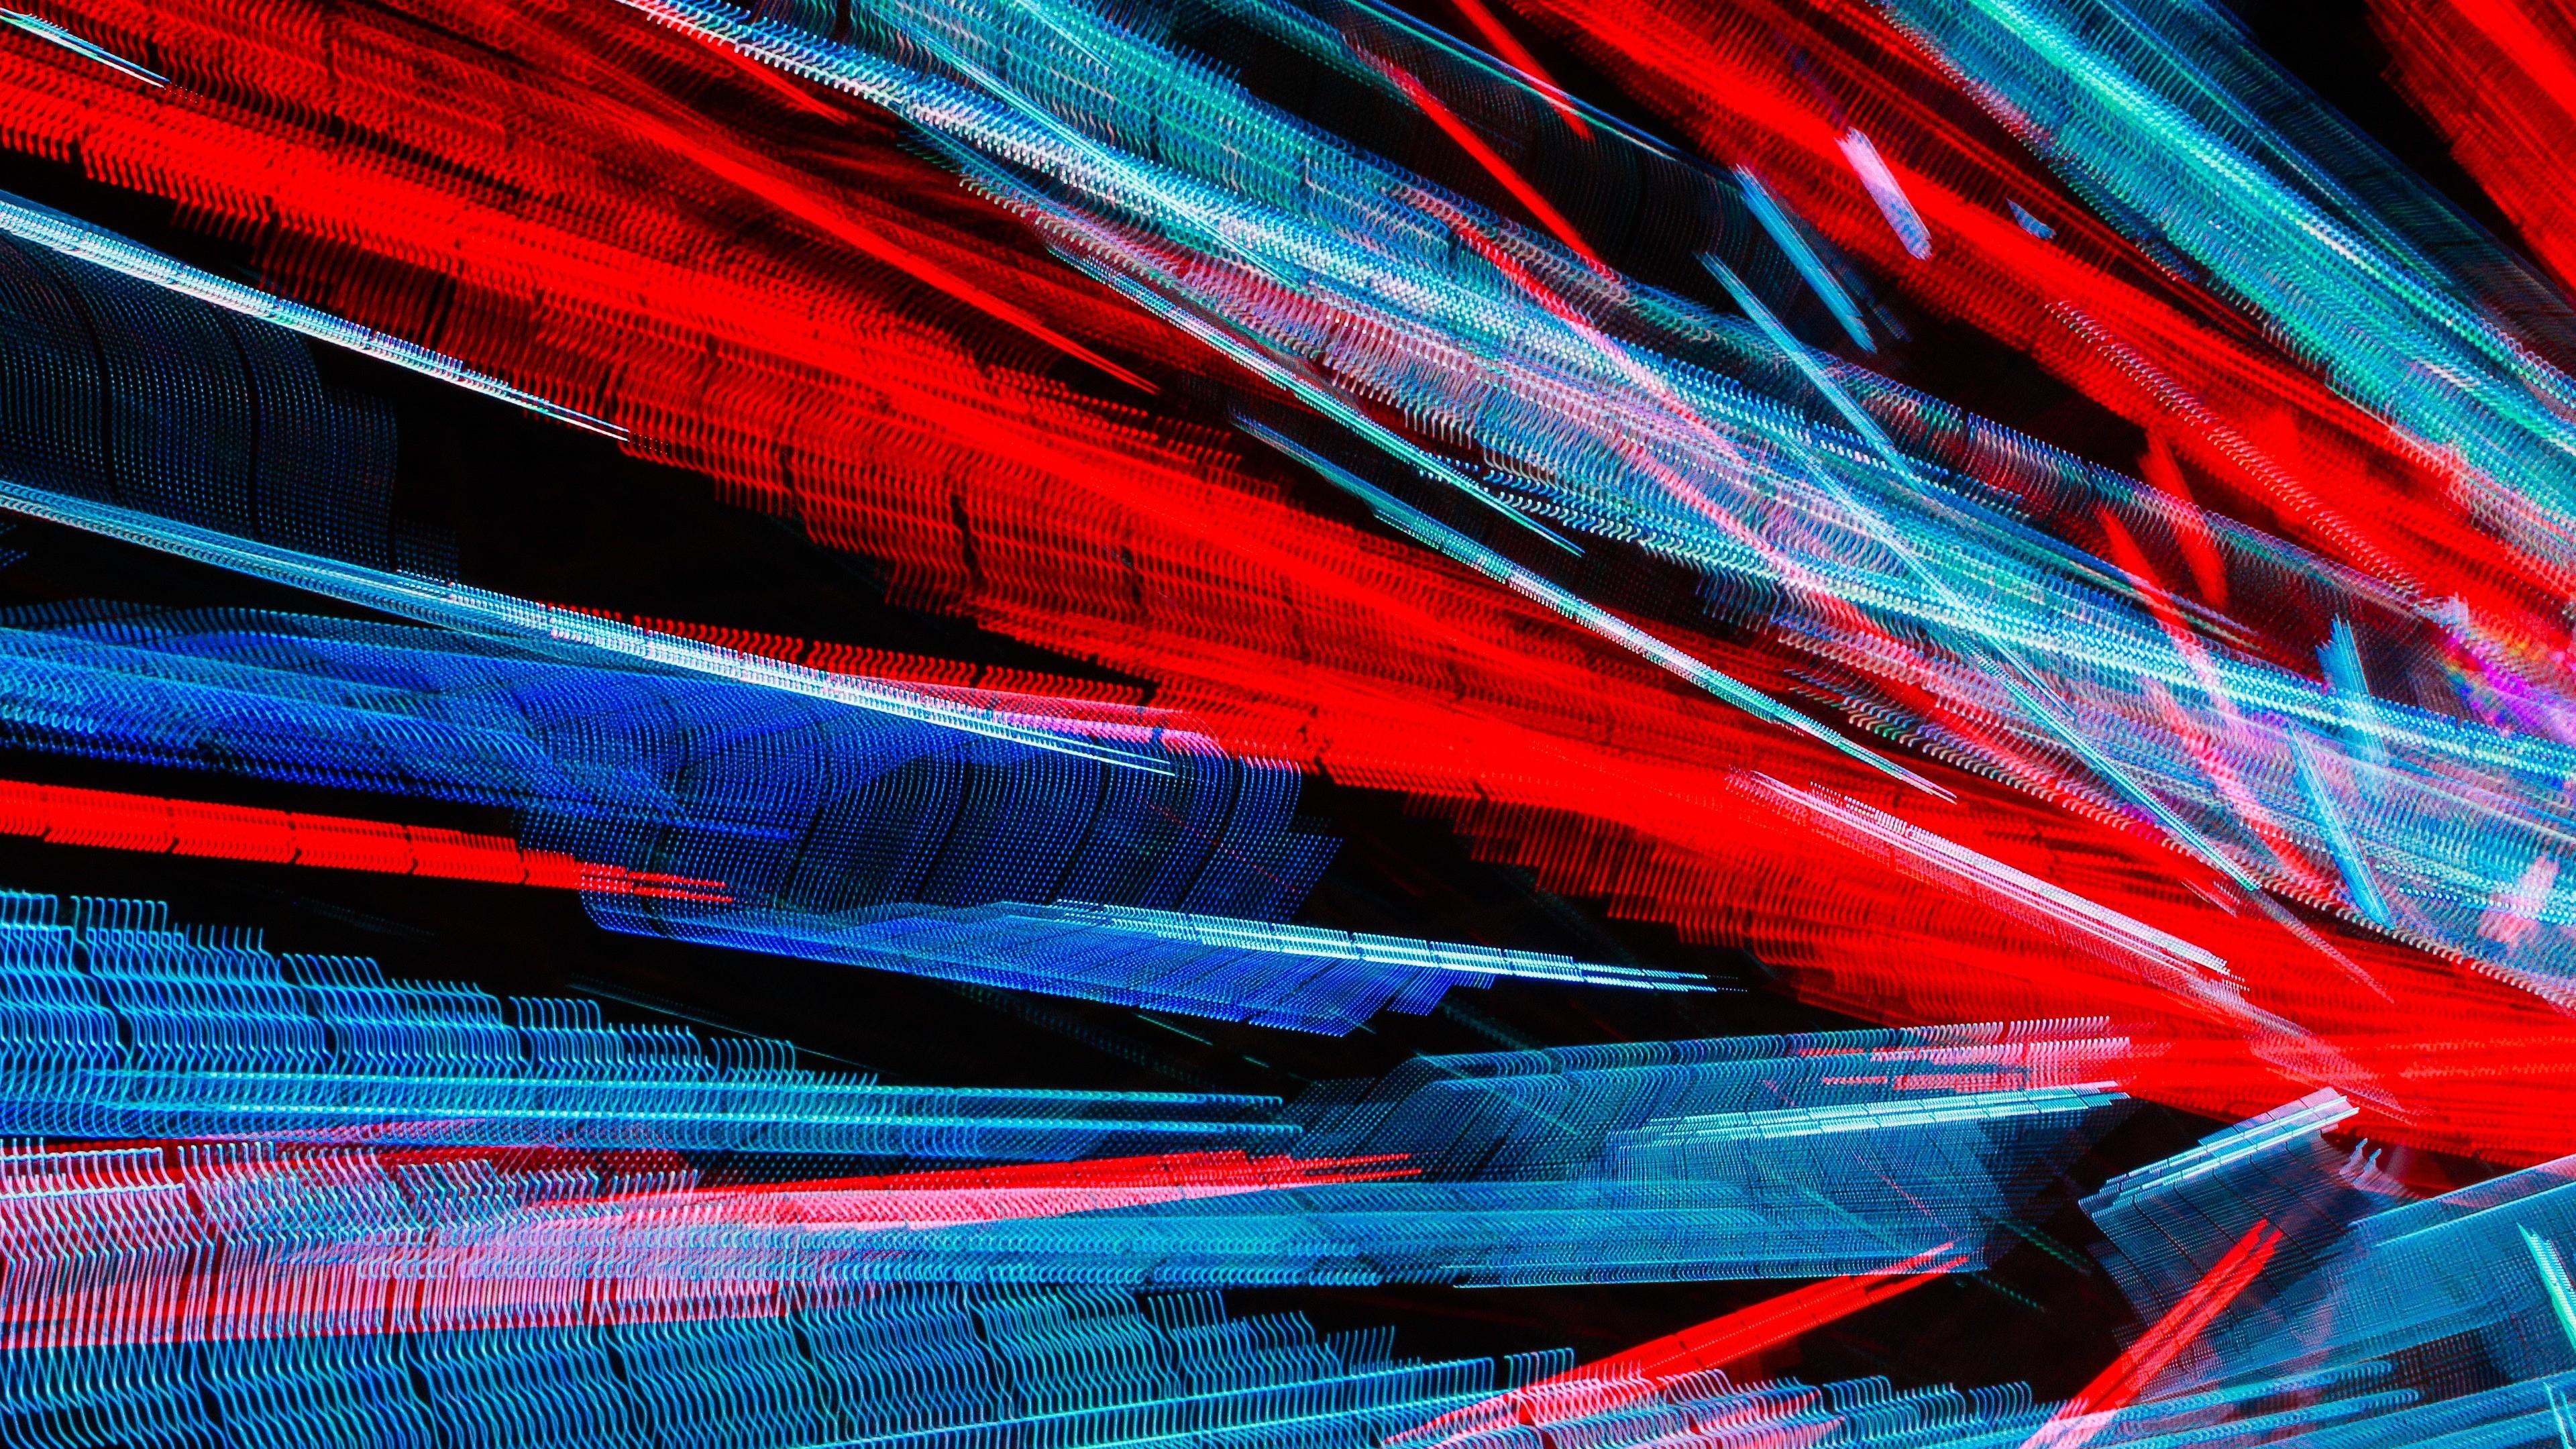 Red and Blue Design Abstract 4K Wallpaper